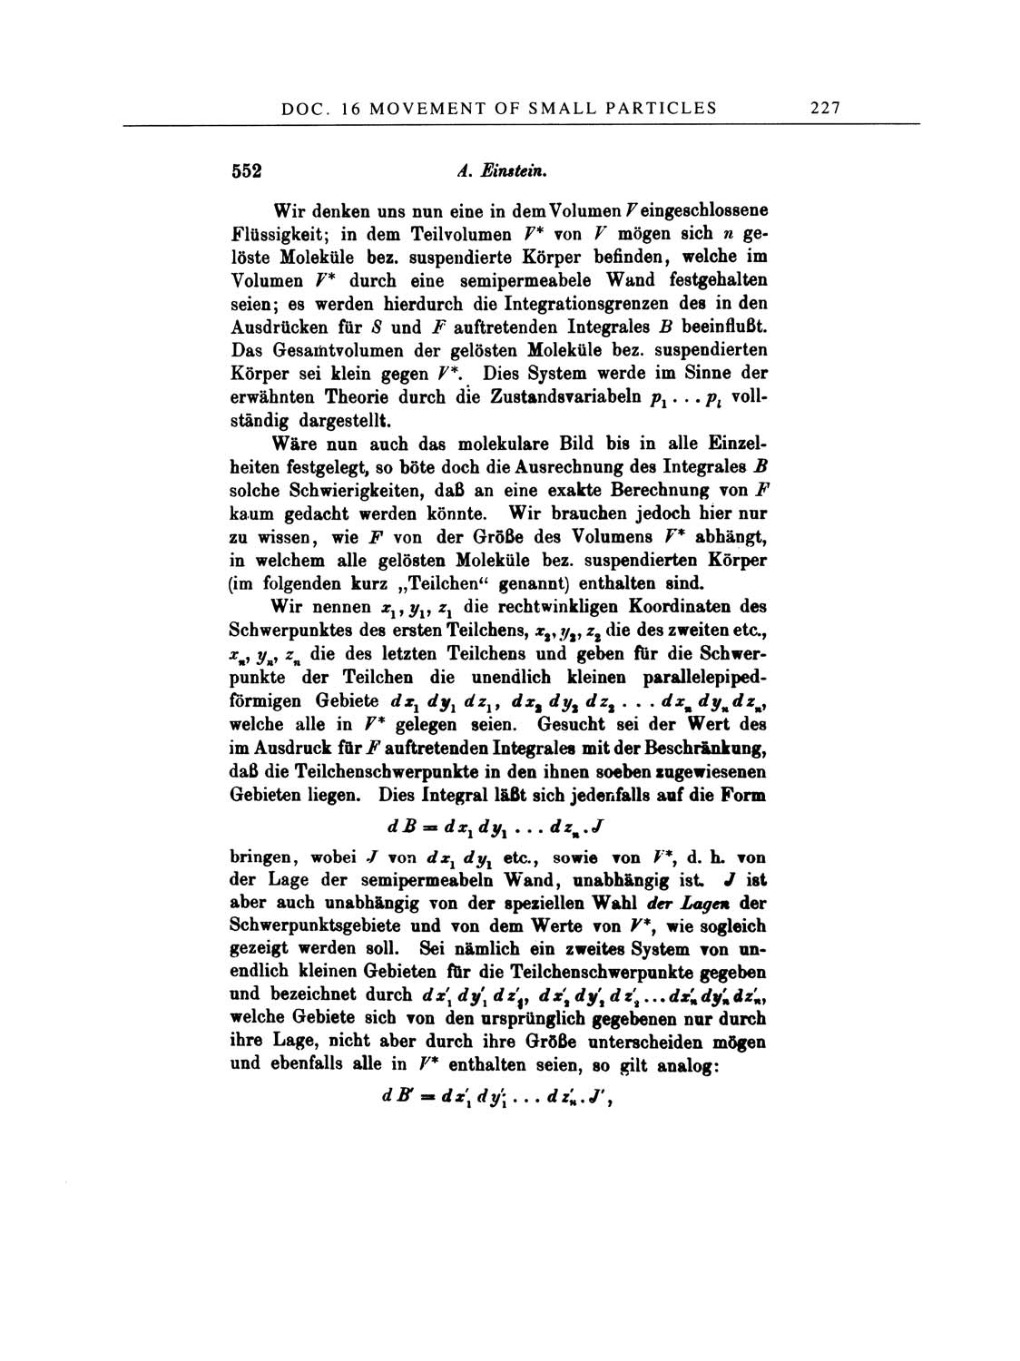 Volume 2: The Swiss Years: Writings, 1900-1909 page 227